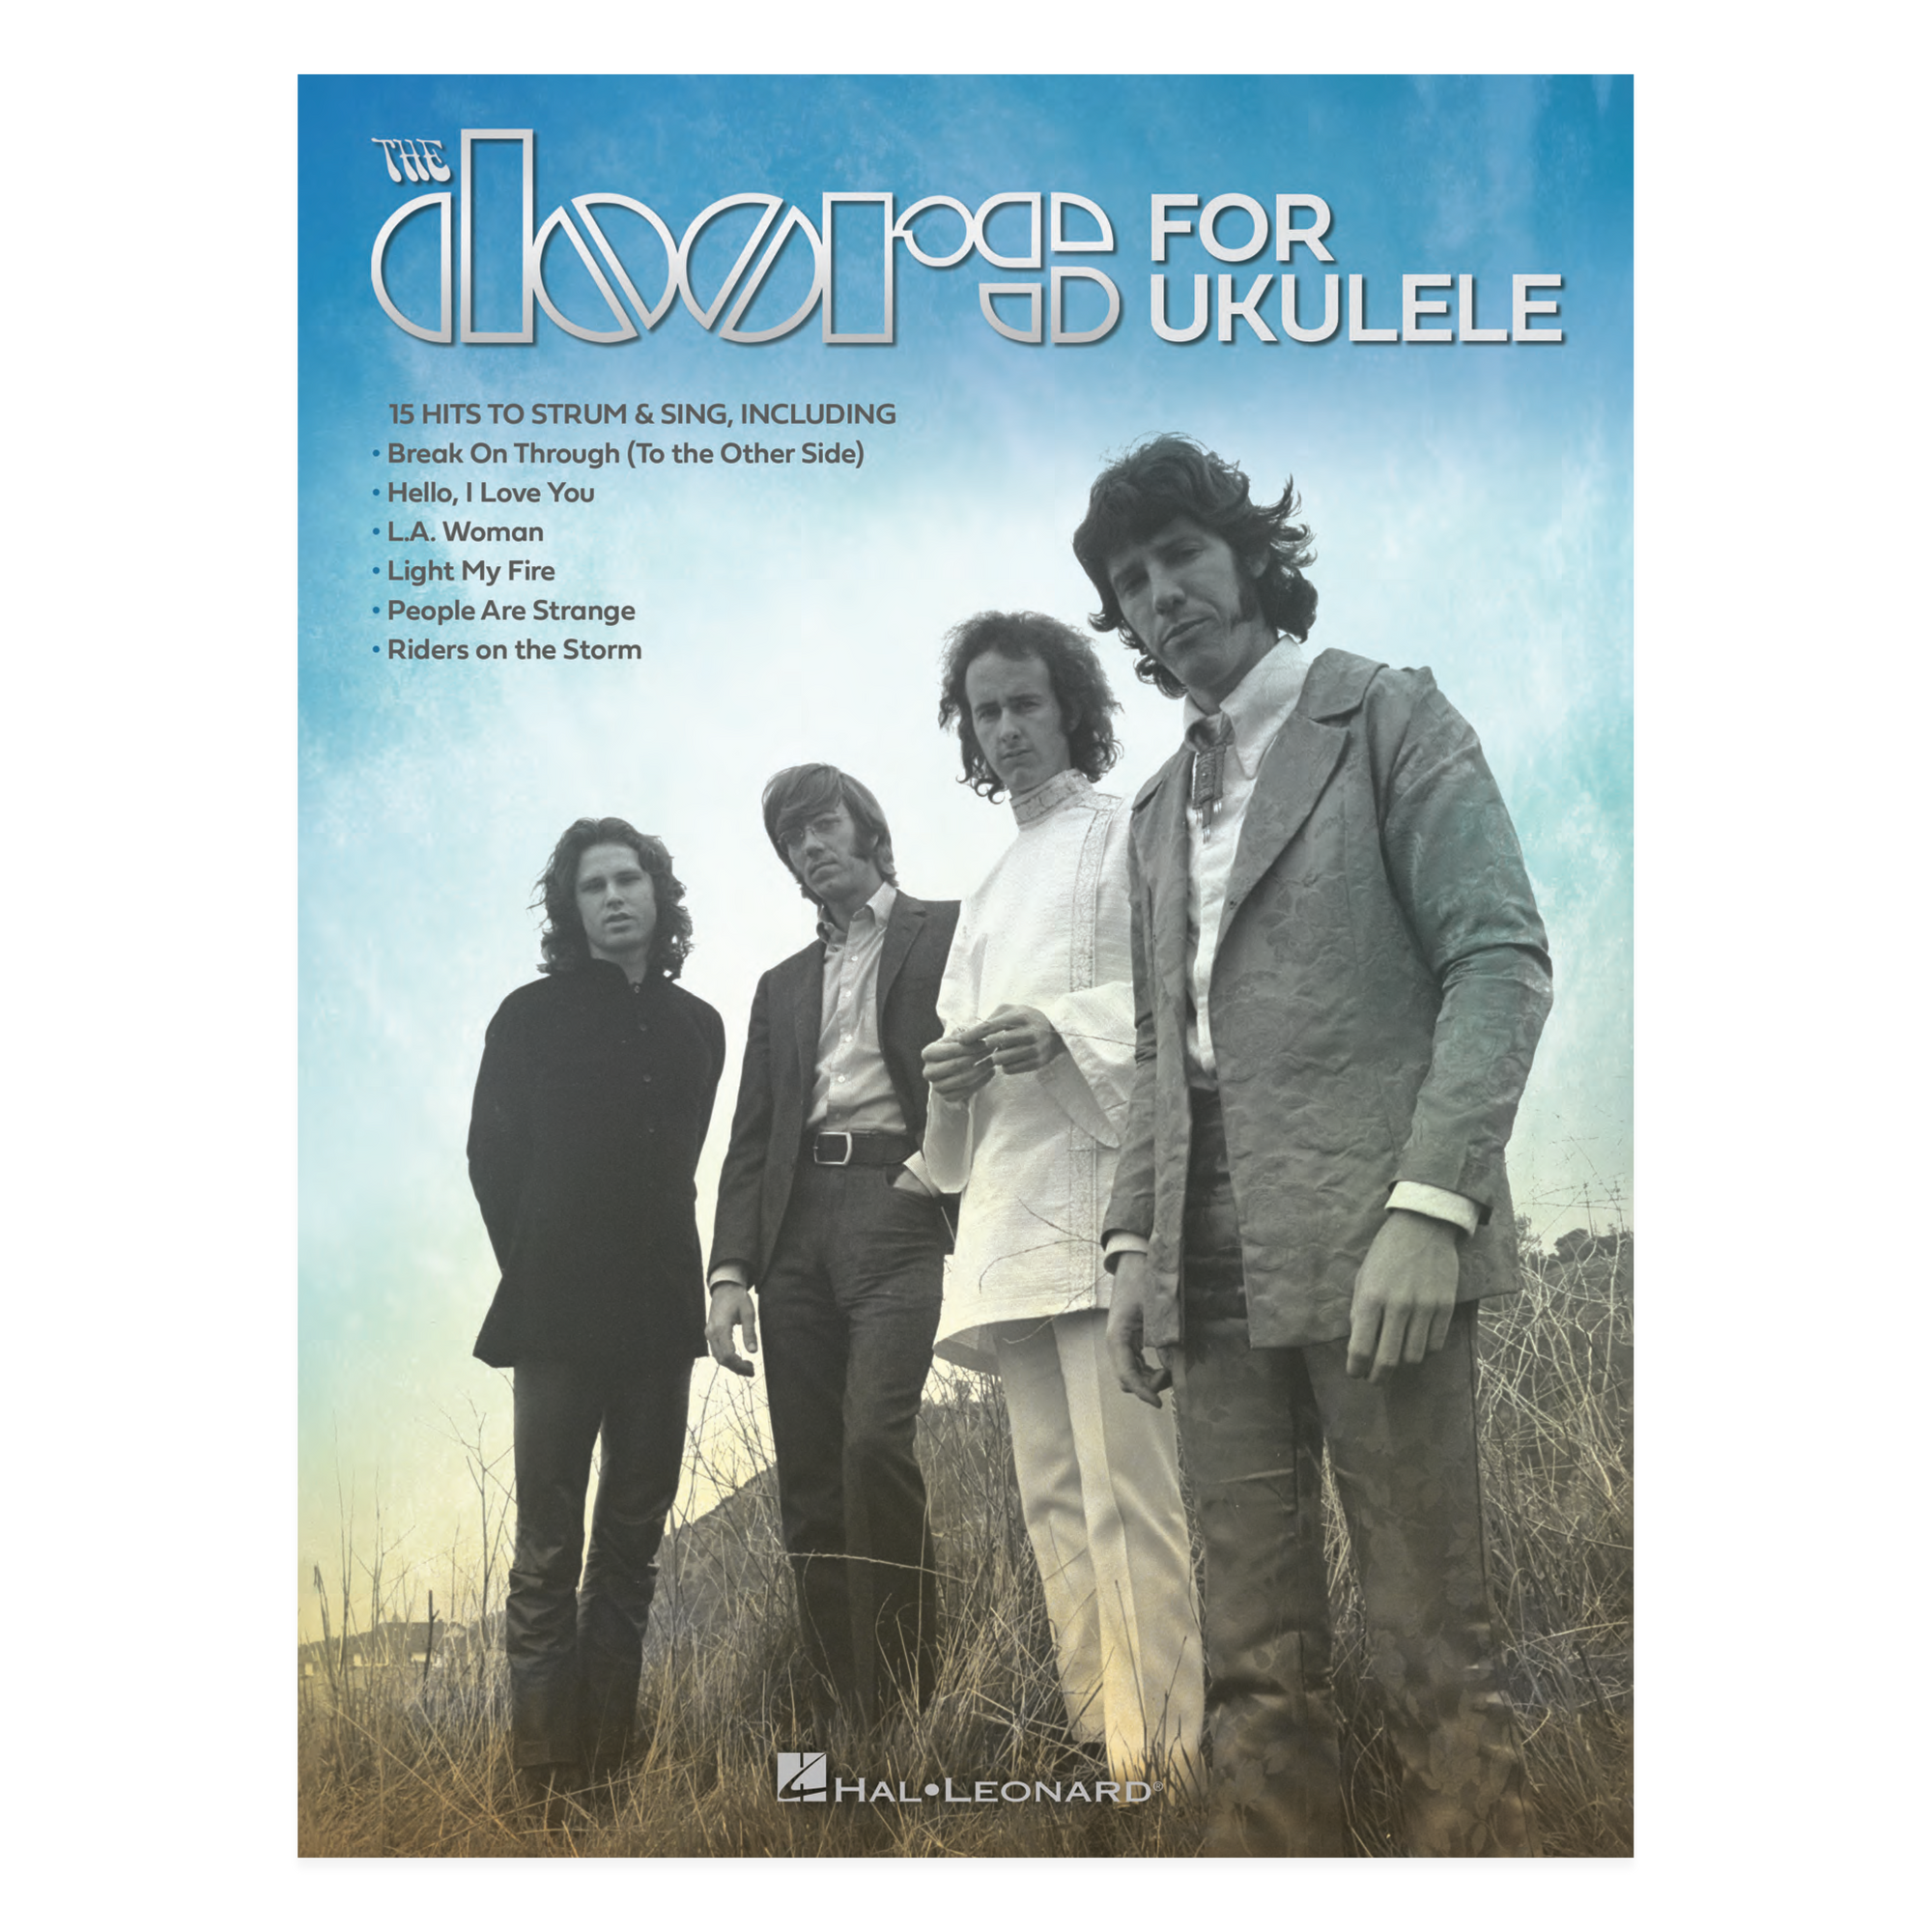 The Doors for Ukulele Songbook